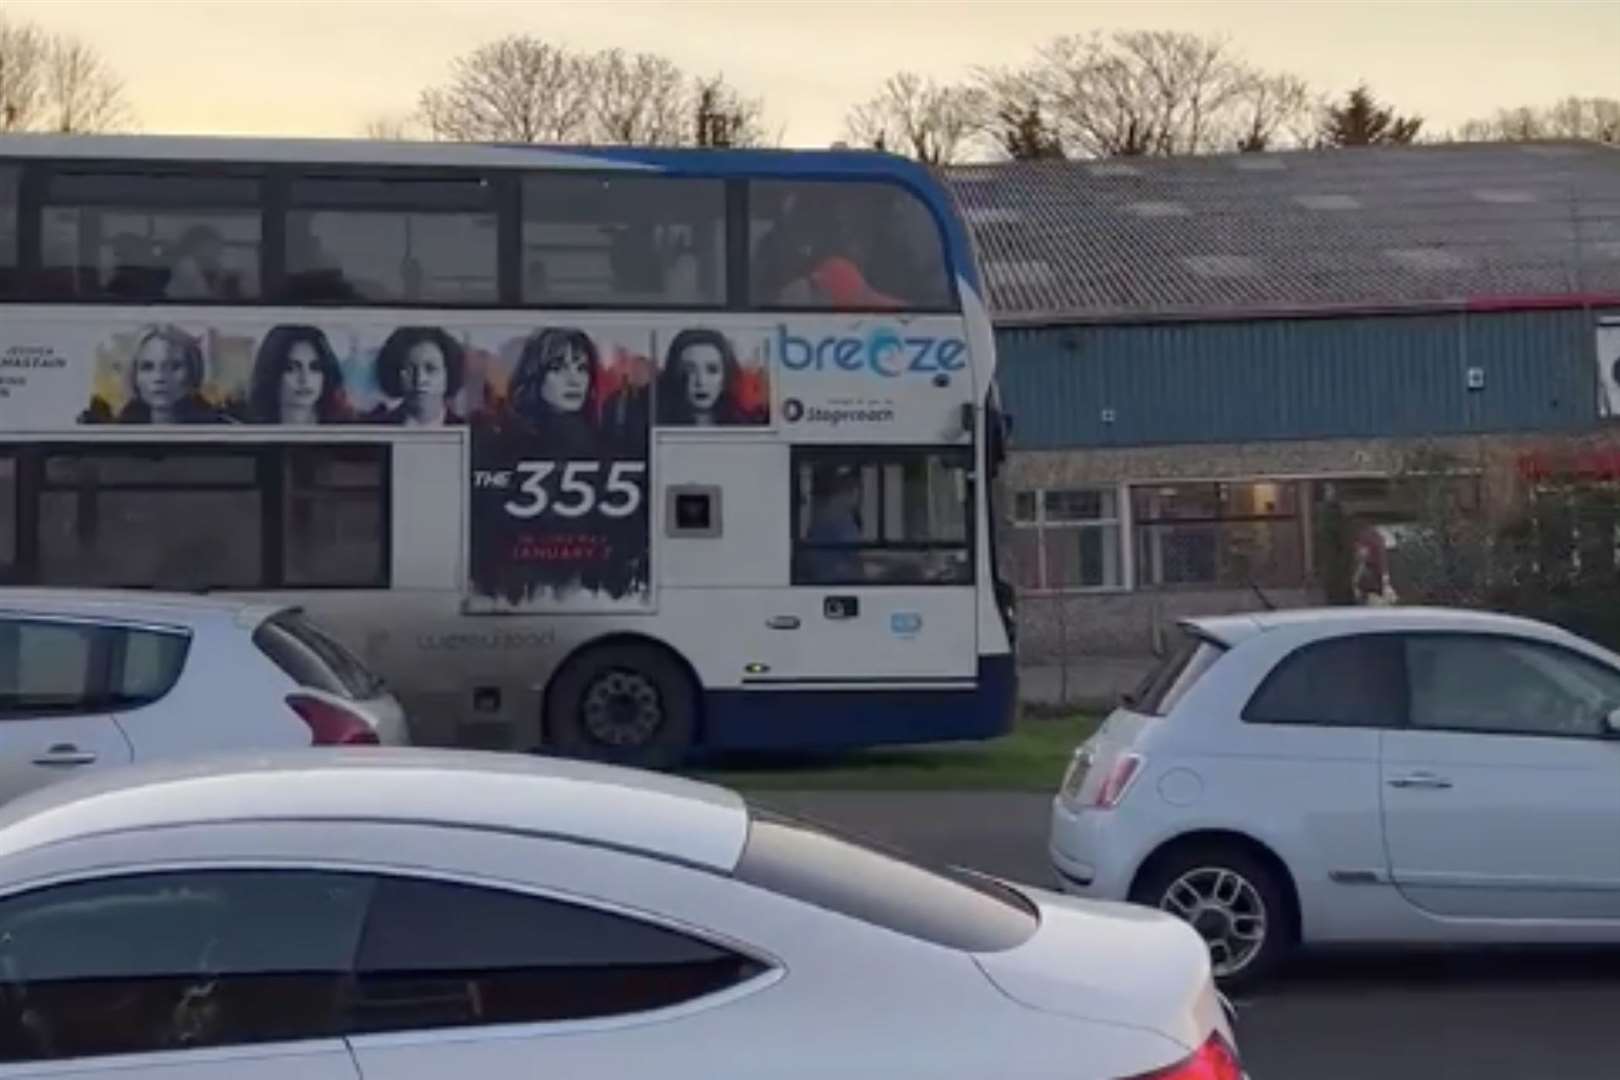 The coach was caught on camera leaving the road to avoid a jam